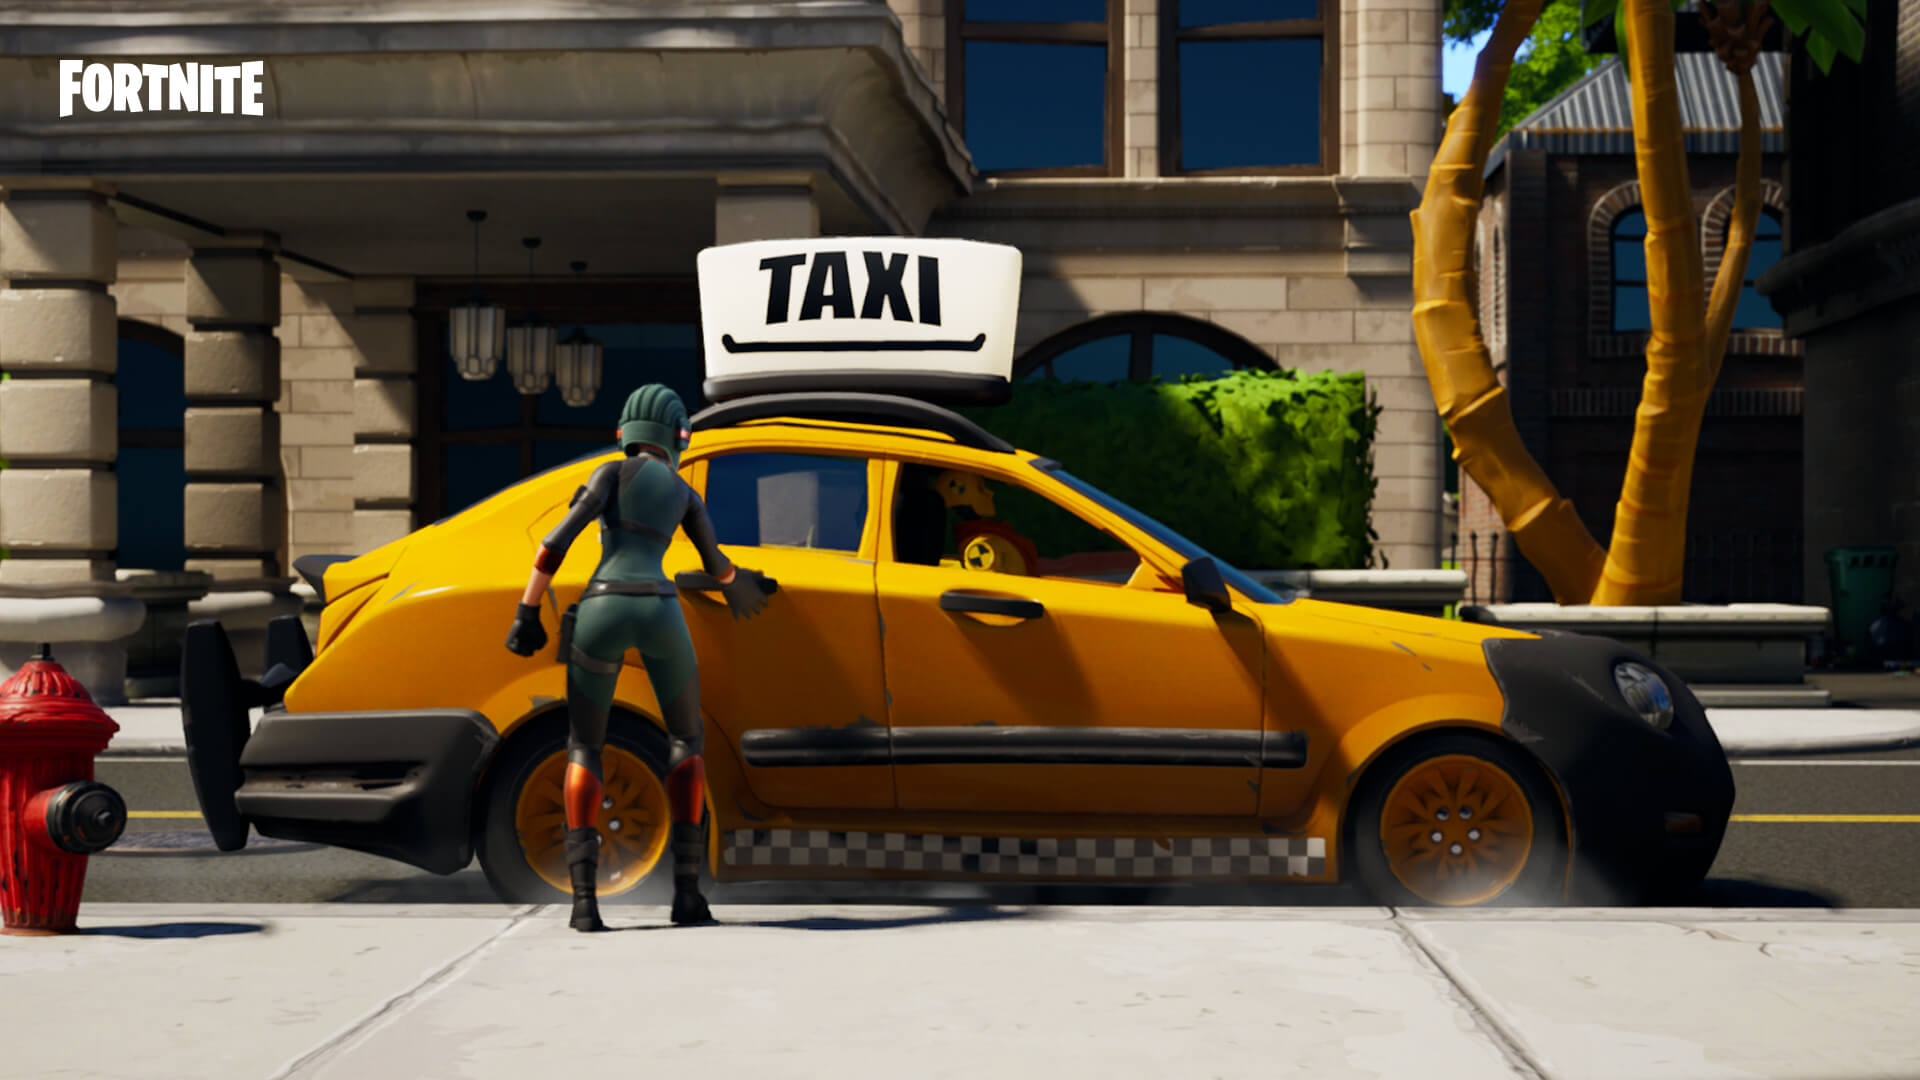 Fortnite Taxis Picados